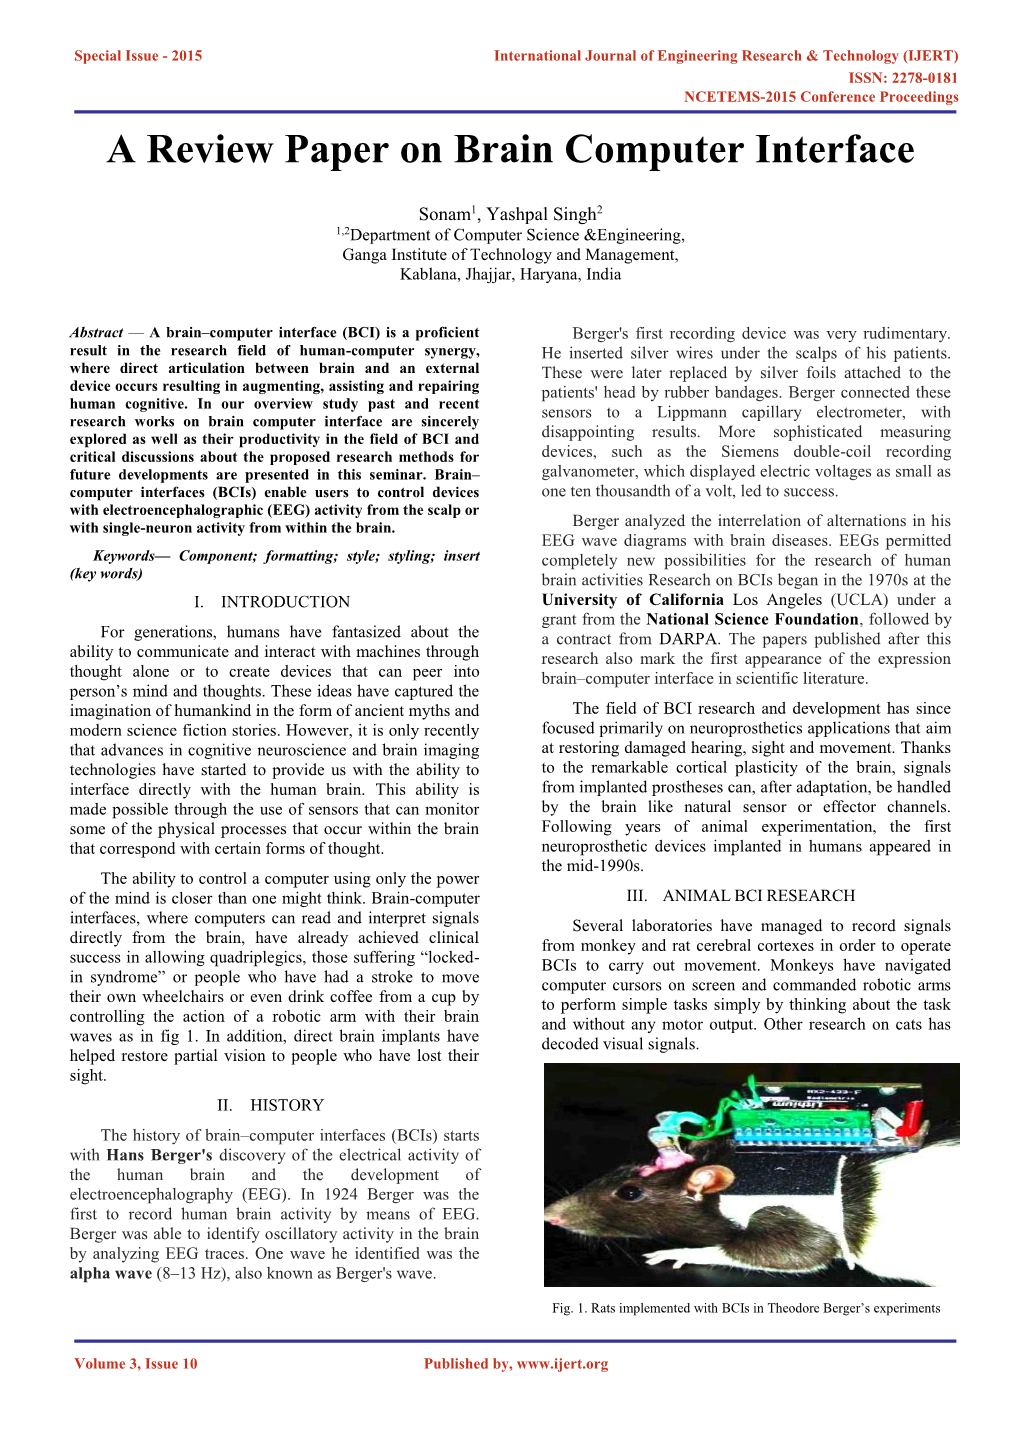 A Review Paper on Brain Computer Interface